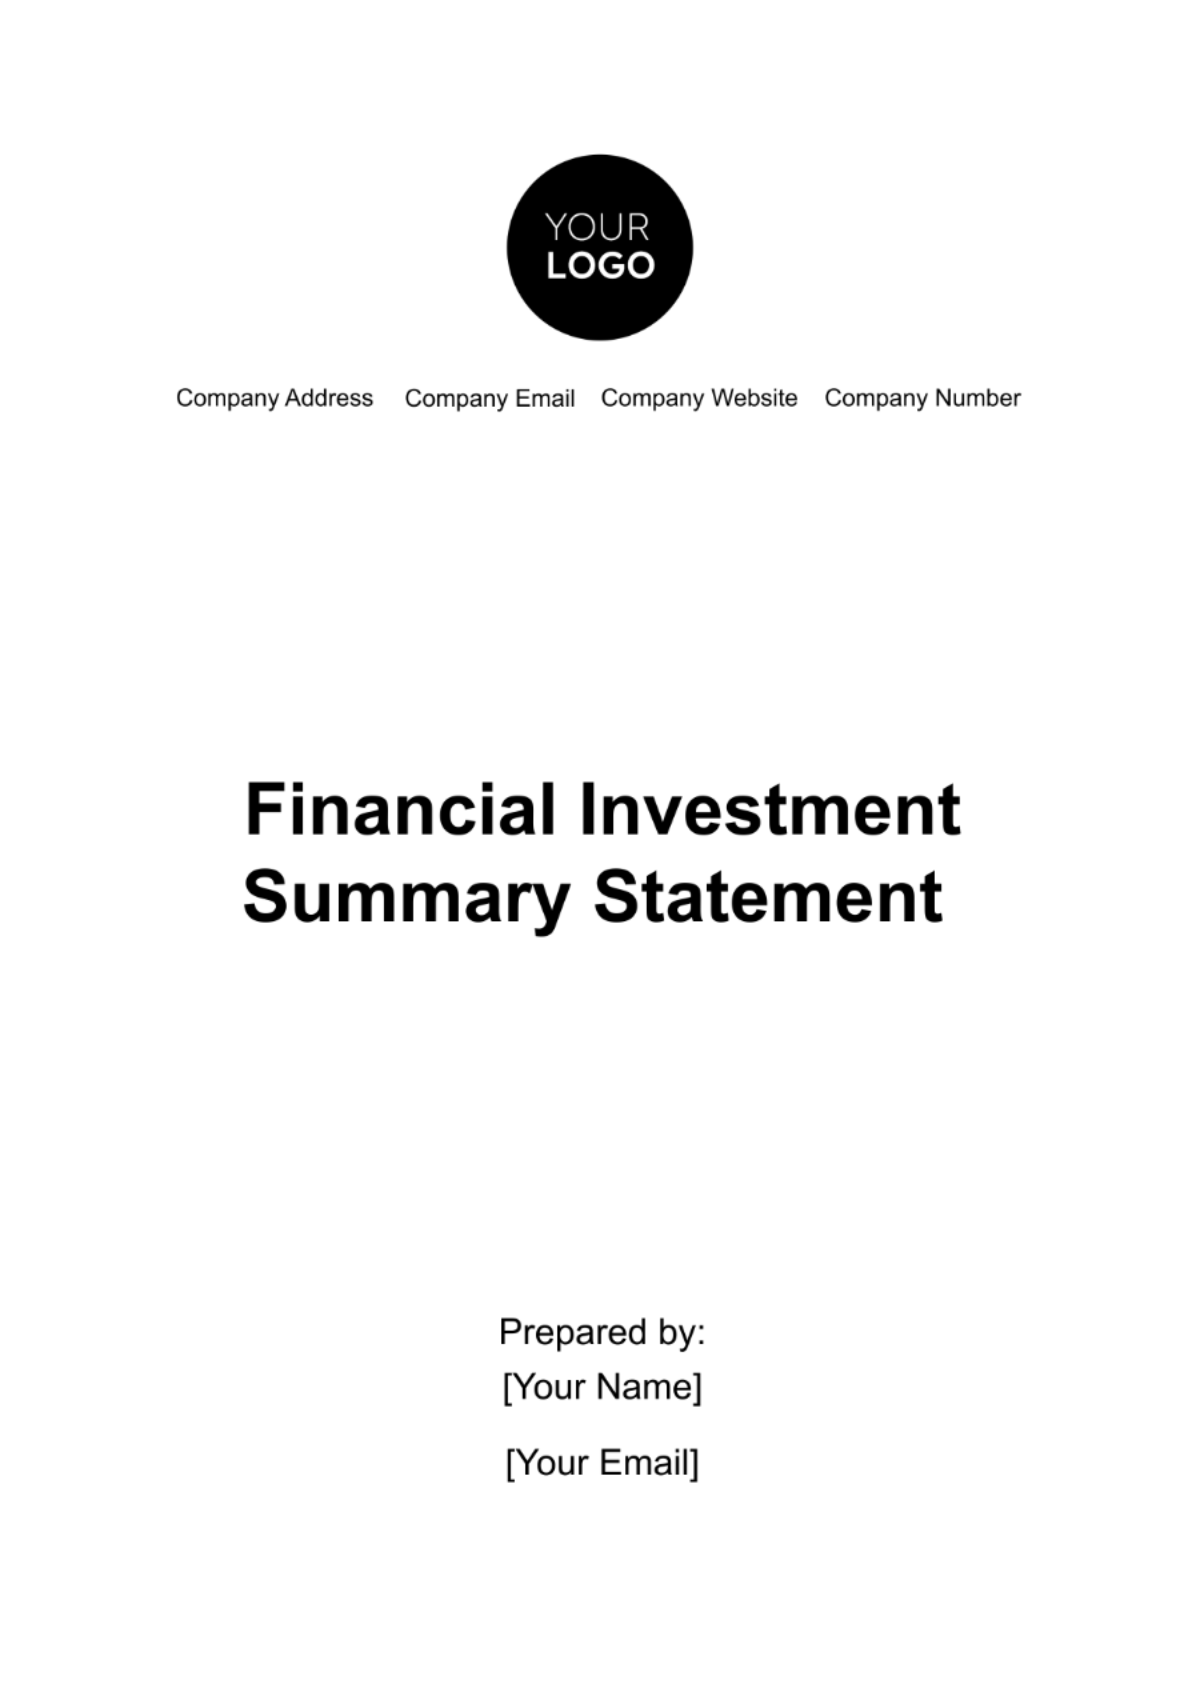 Financial Investment Summary Statement Template